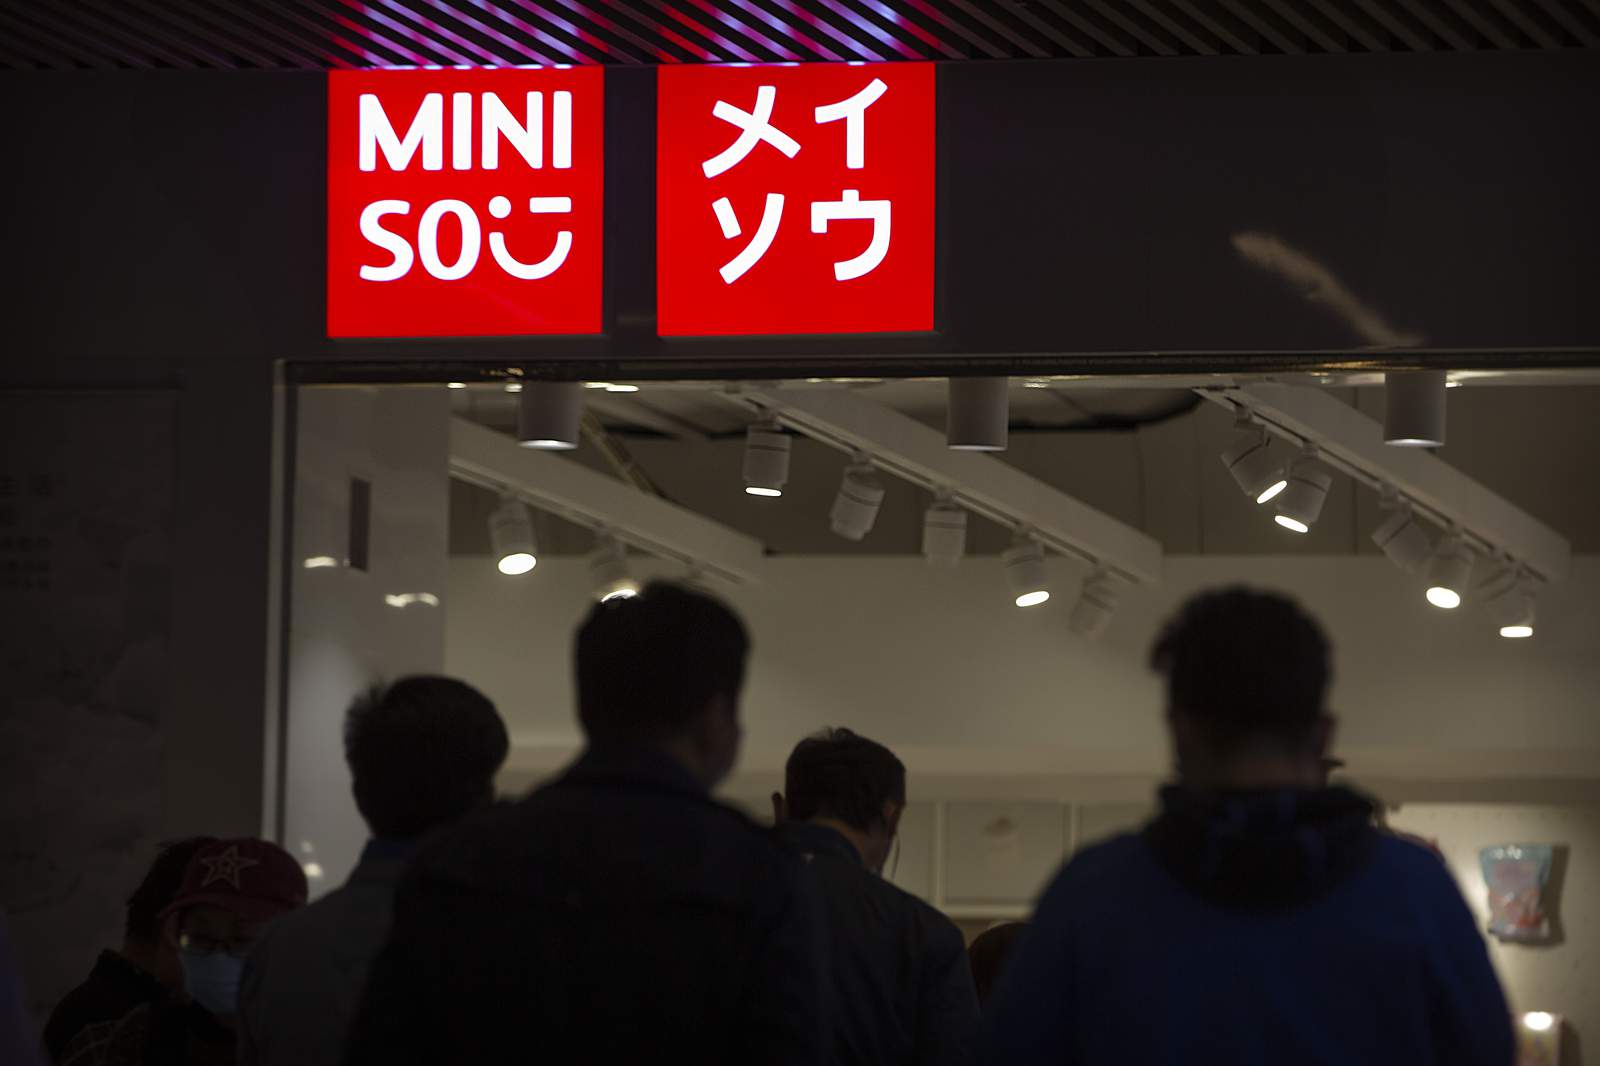 Shares of Chinese retailer Miniso rise in Wall Street debut